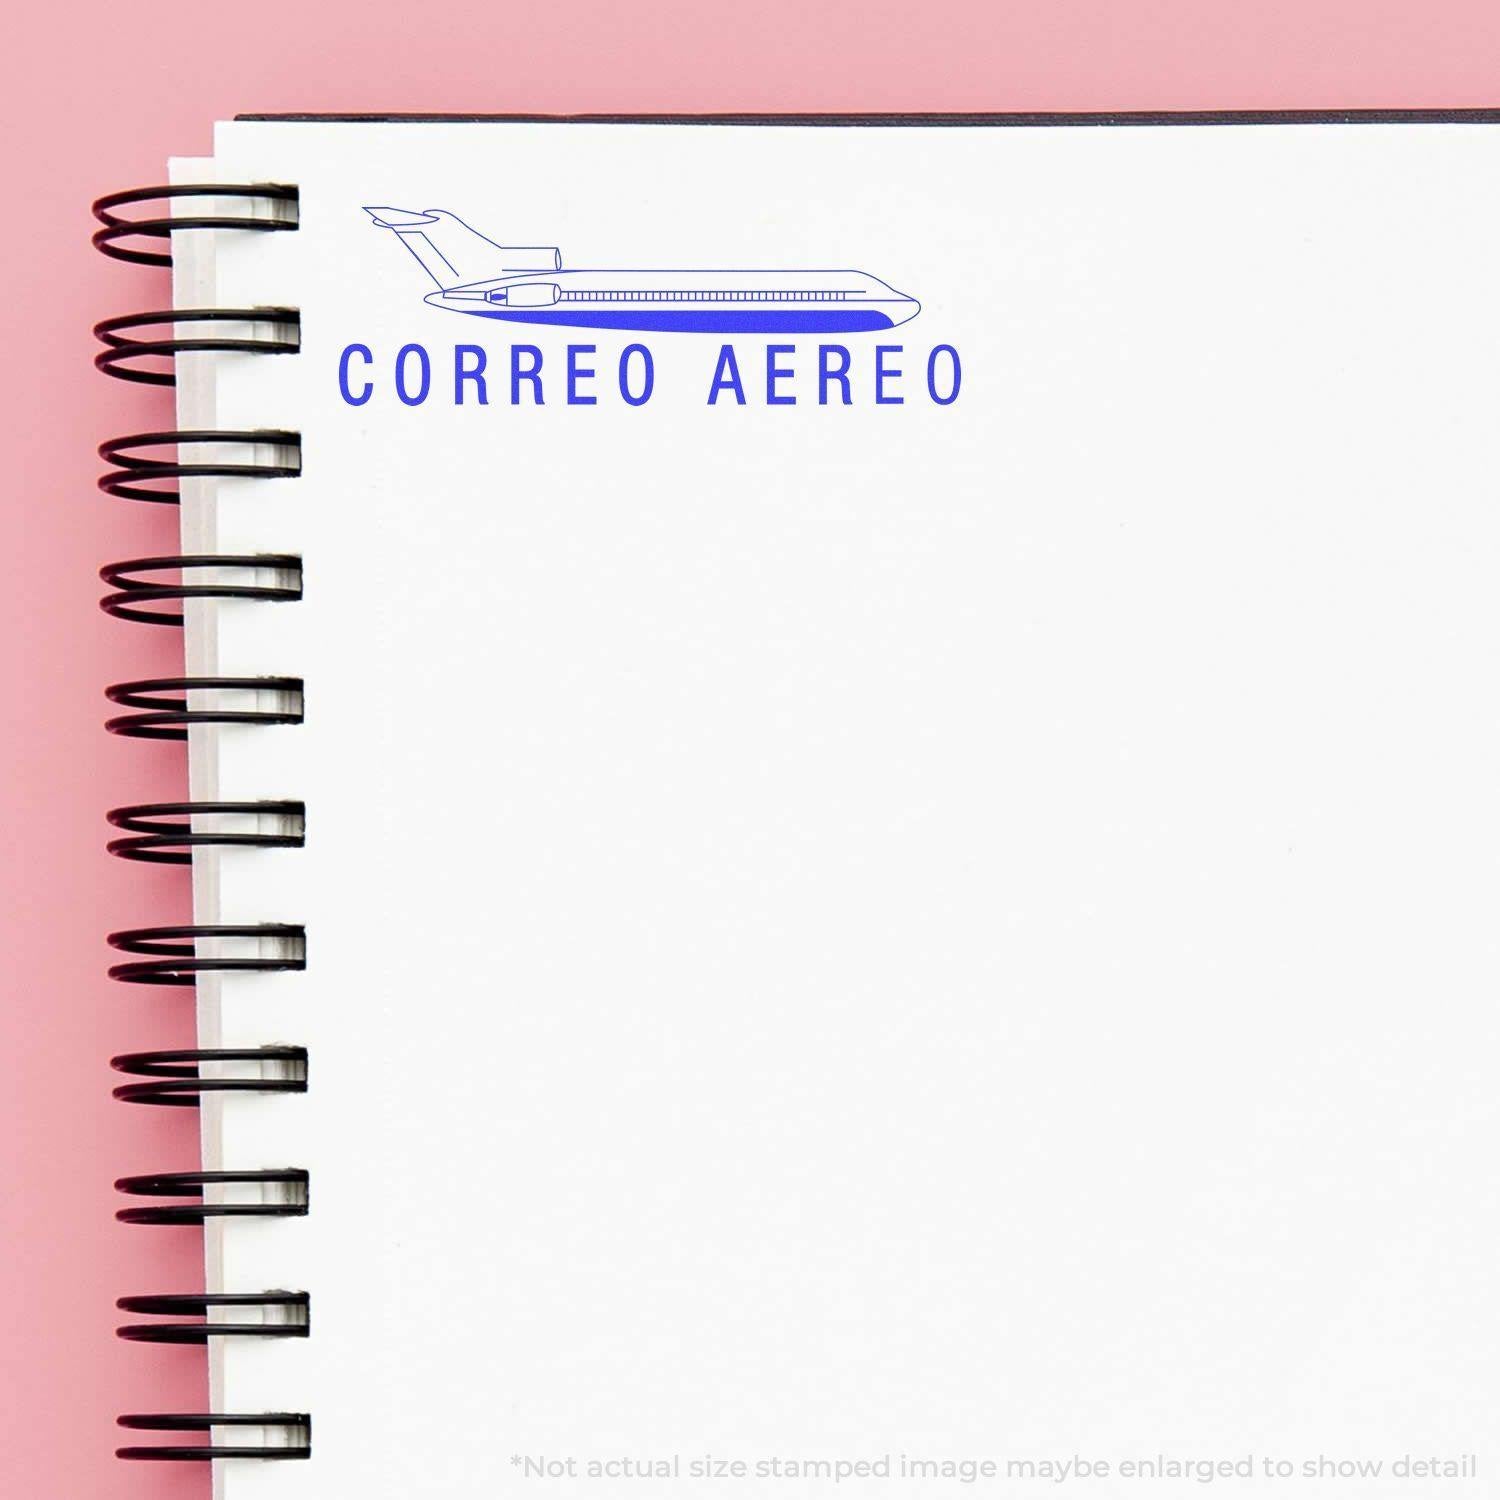 A self-inking stamp with a stamped image showing how the text "CORREO AERO" in a large font with an airplane icon showing above the text is displayed by it after stamping.